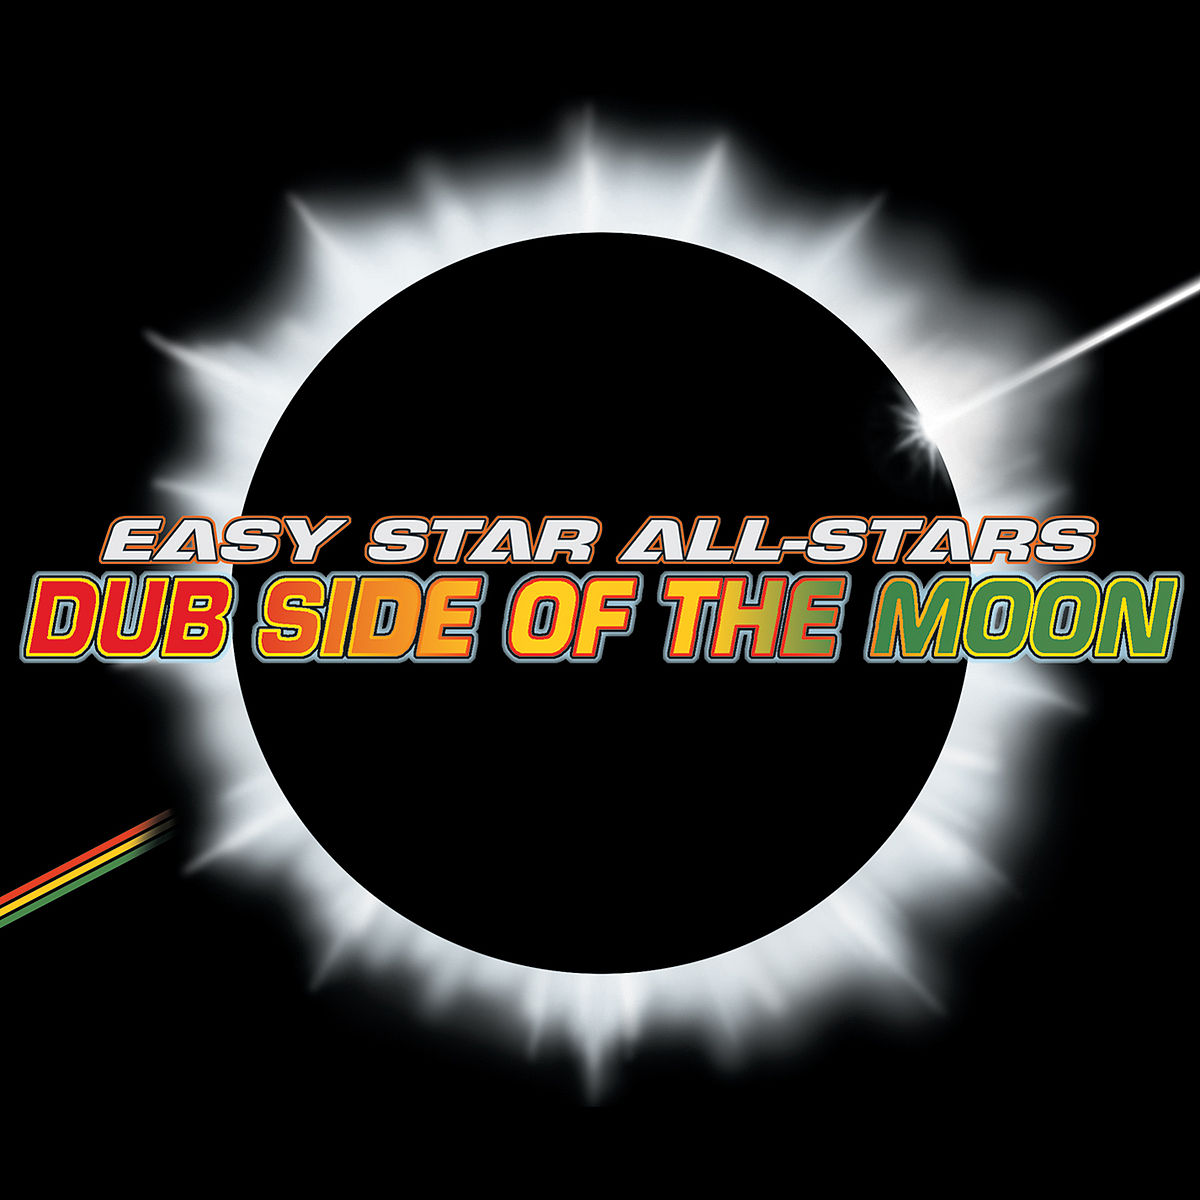 the dub side of the moon